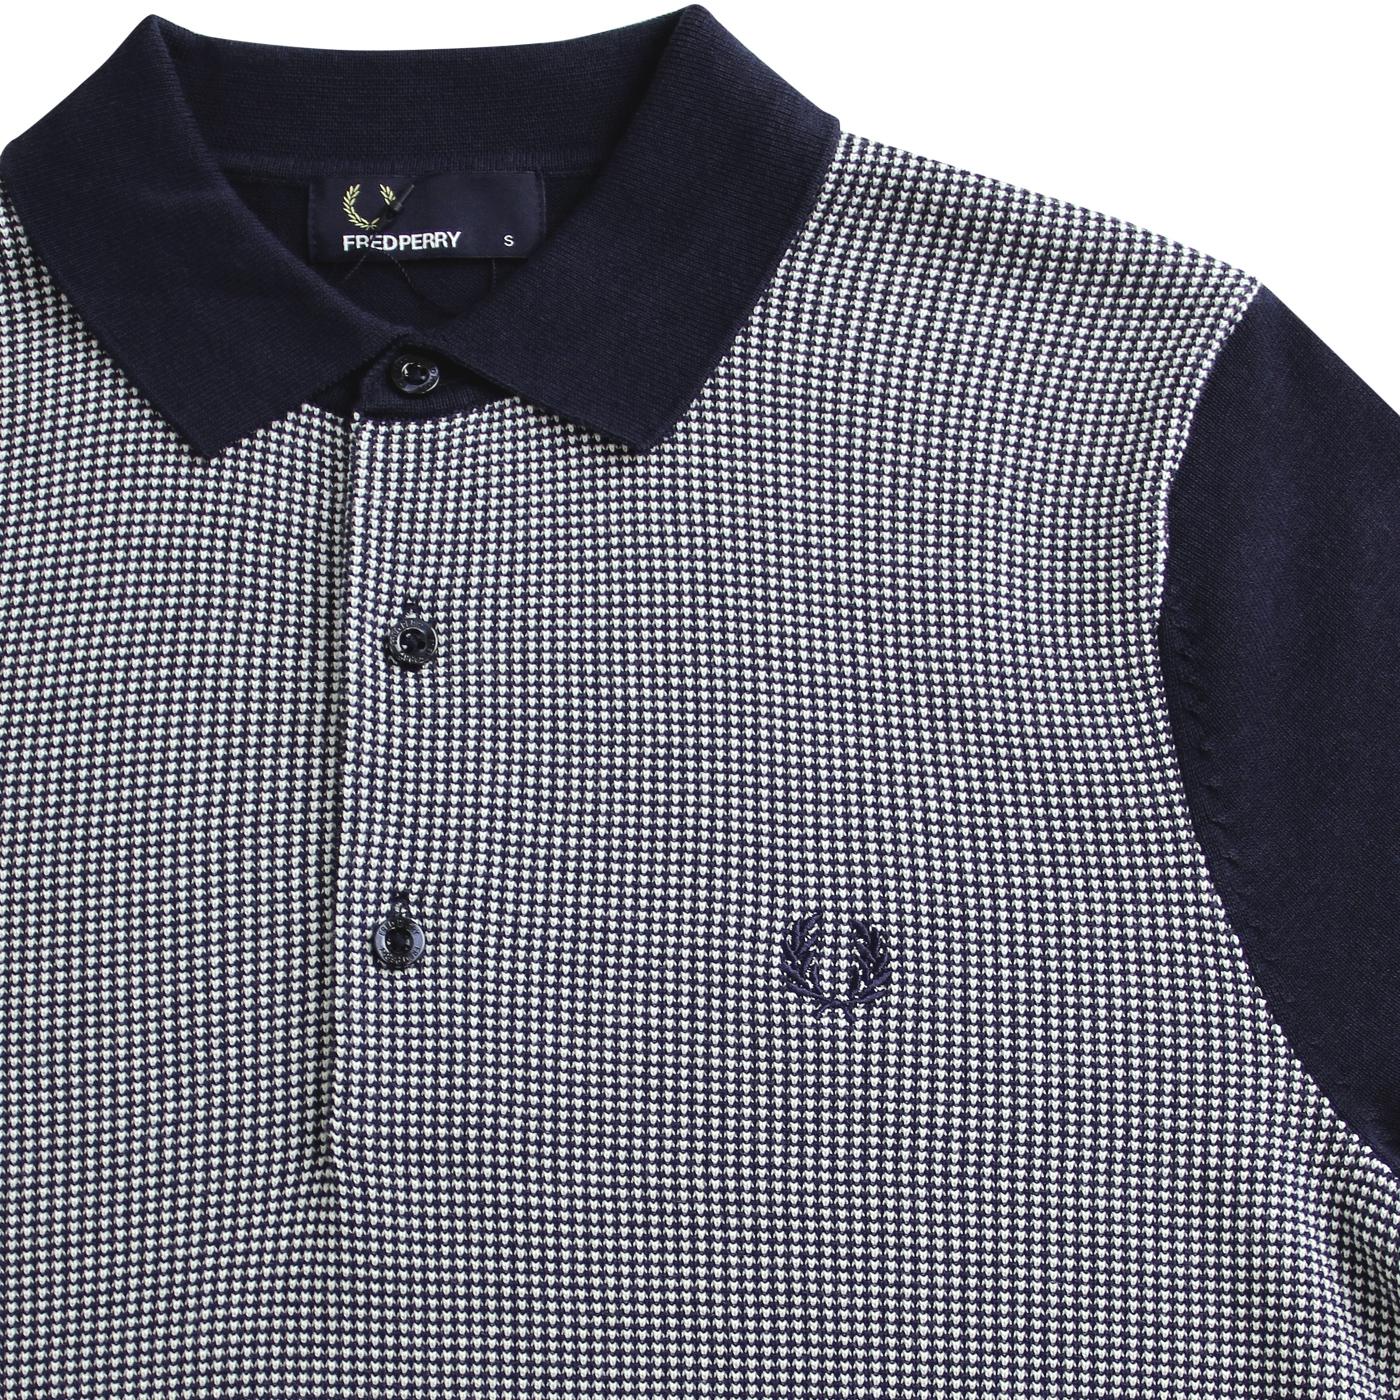 FRED PERRY Mod Birdseye Knitted Polo Top in Deep Carbon